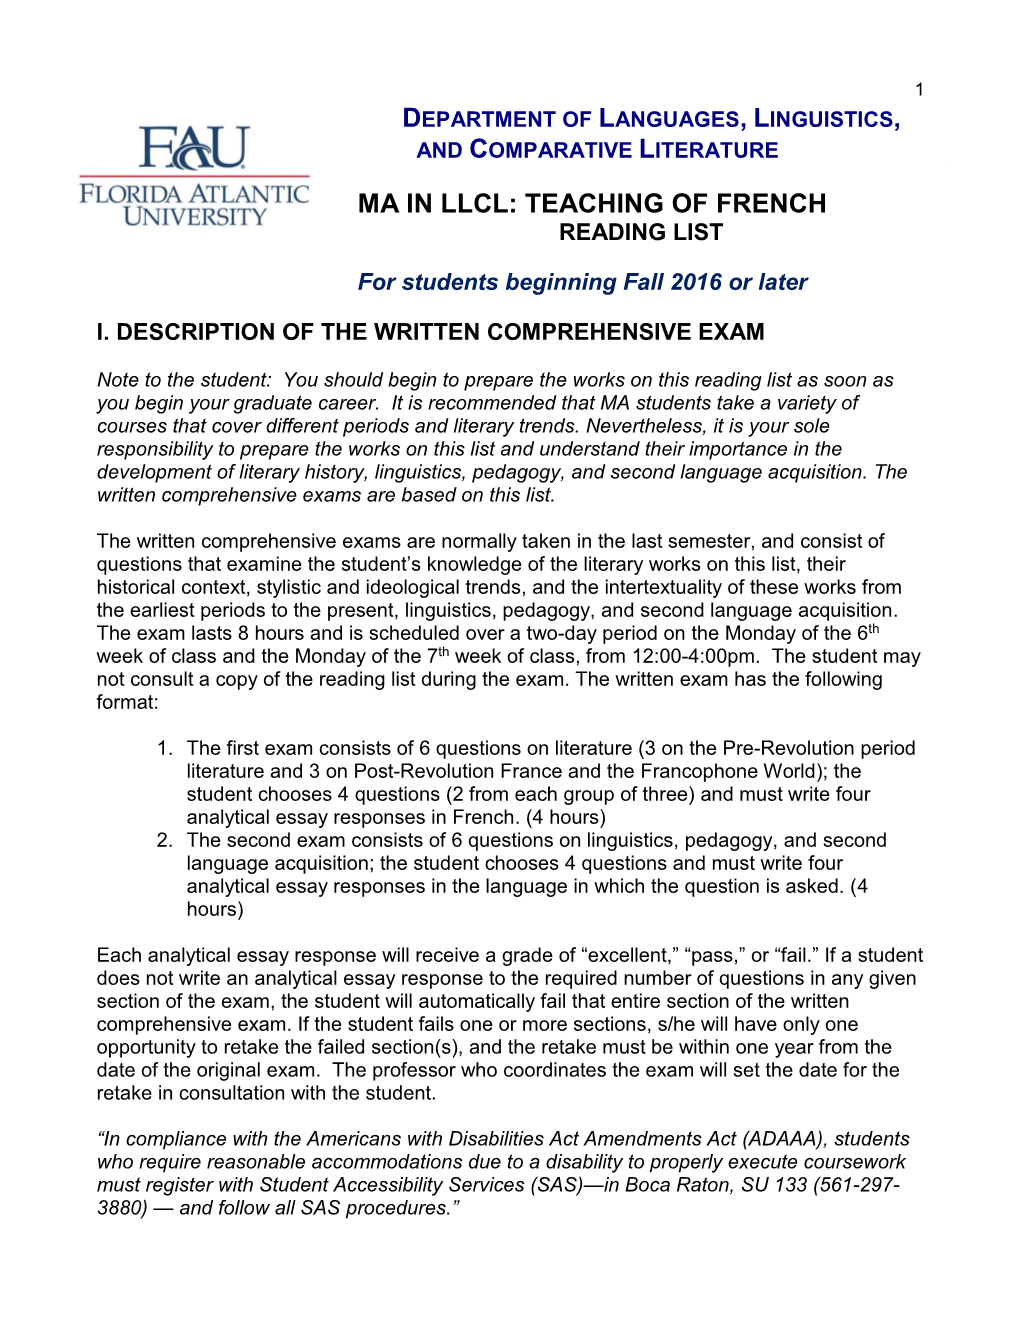 French Comprehensive Reading List